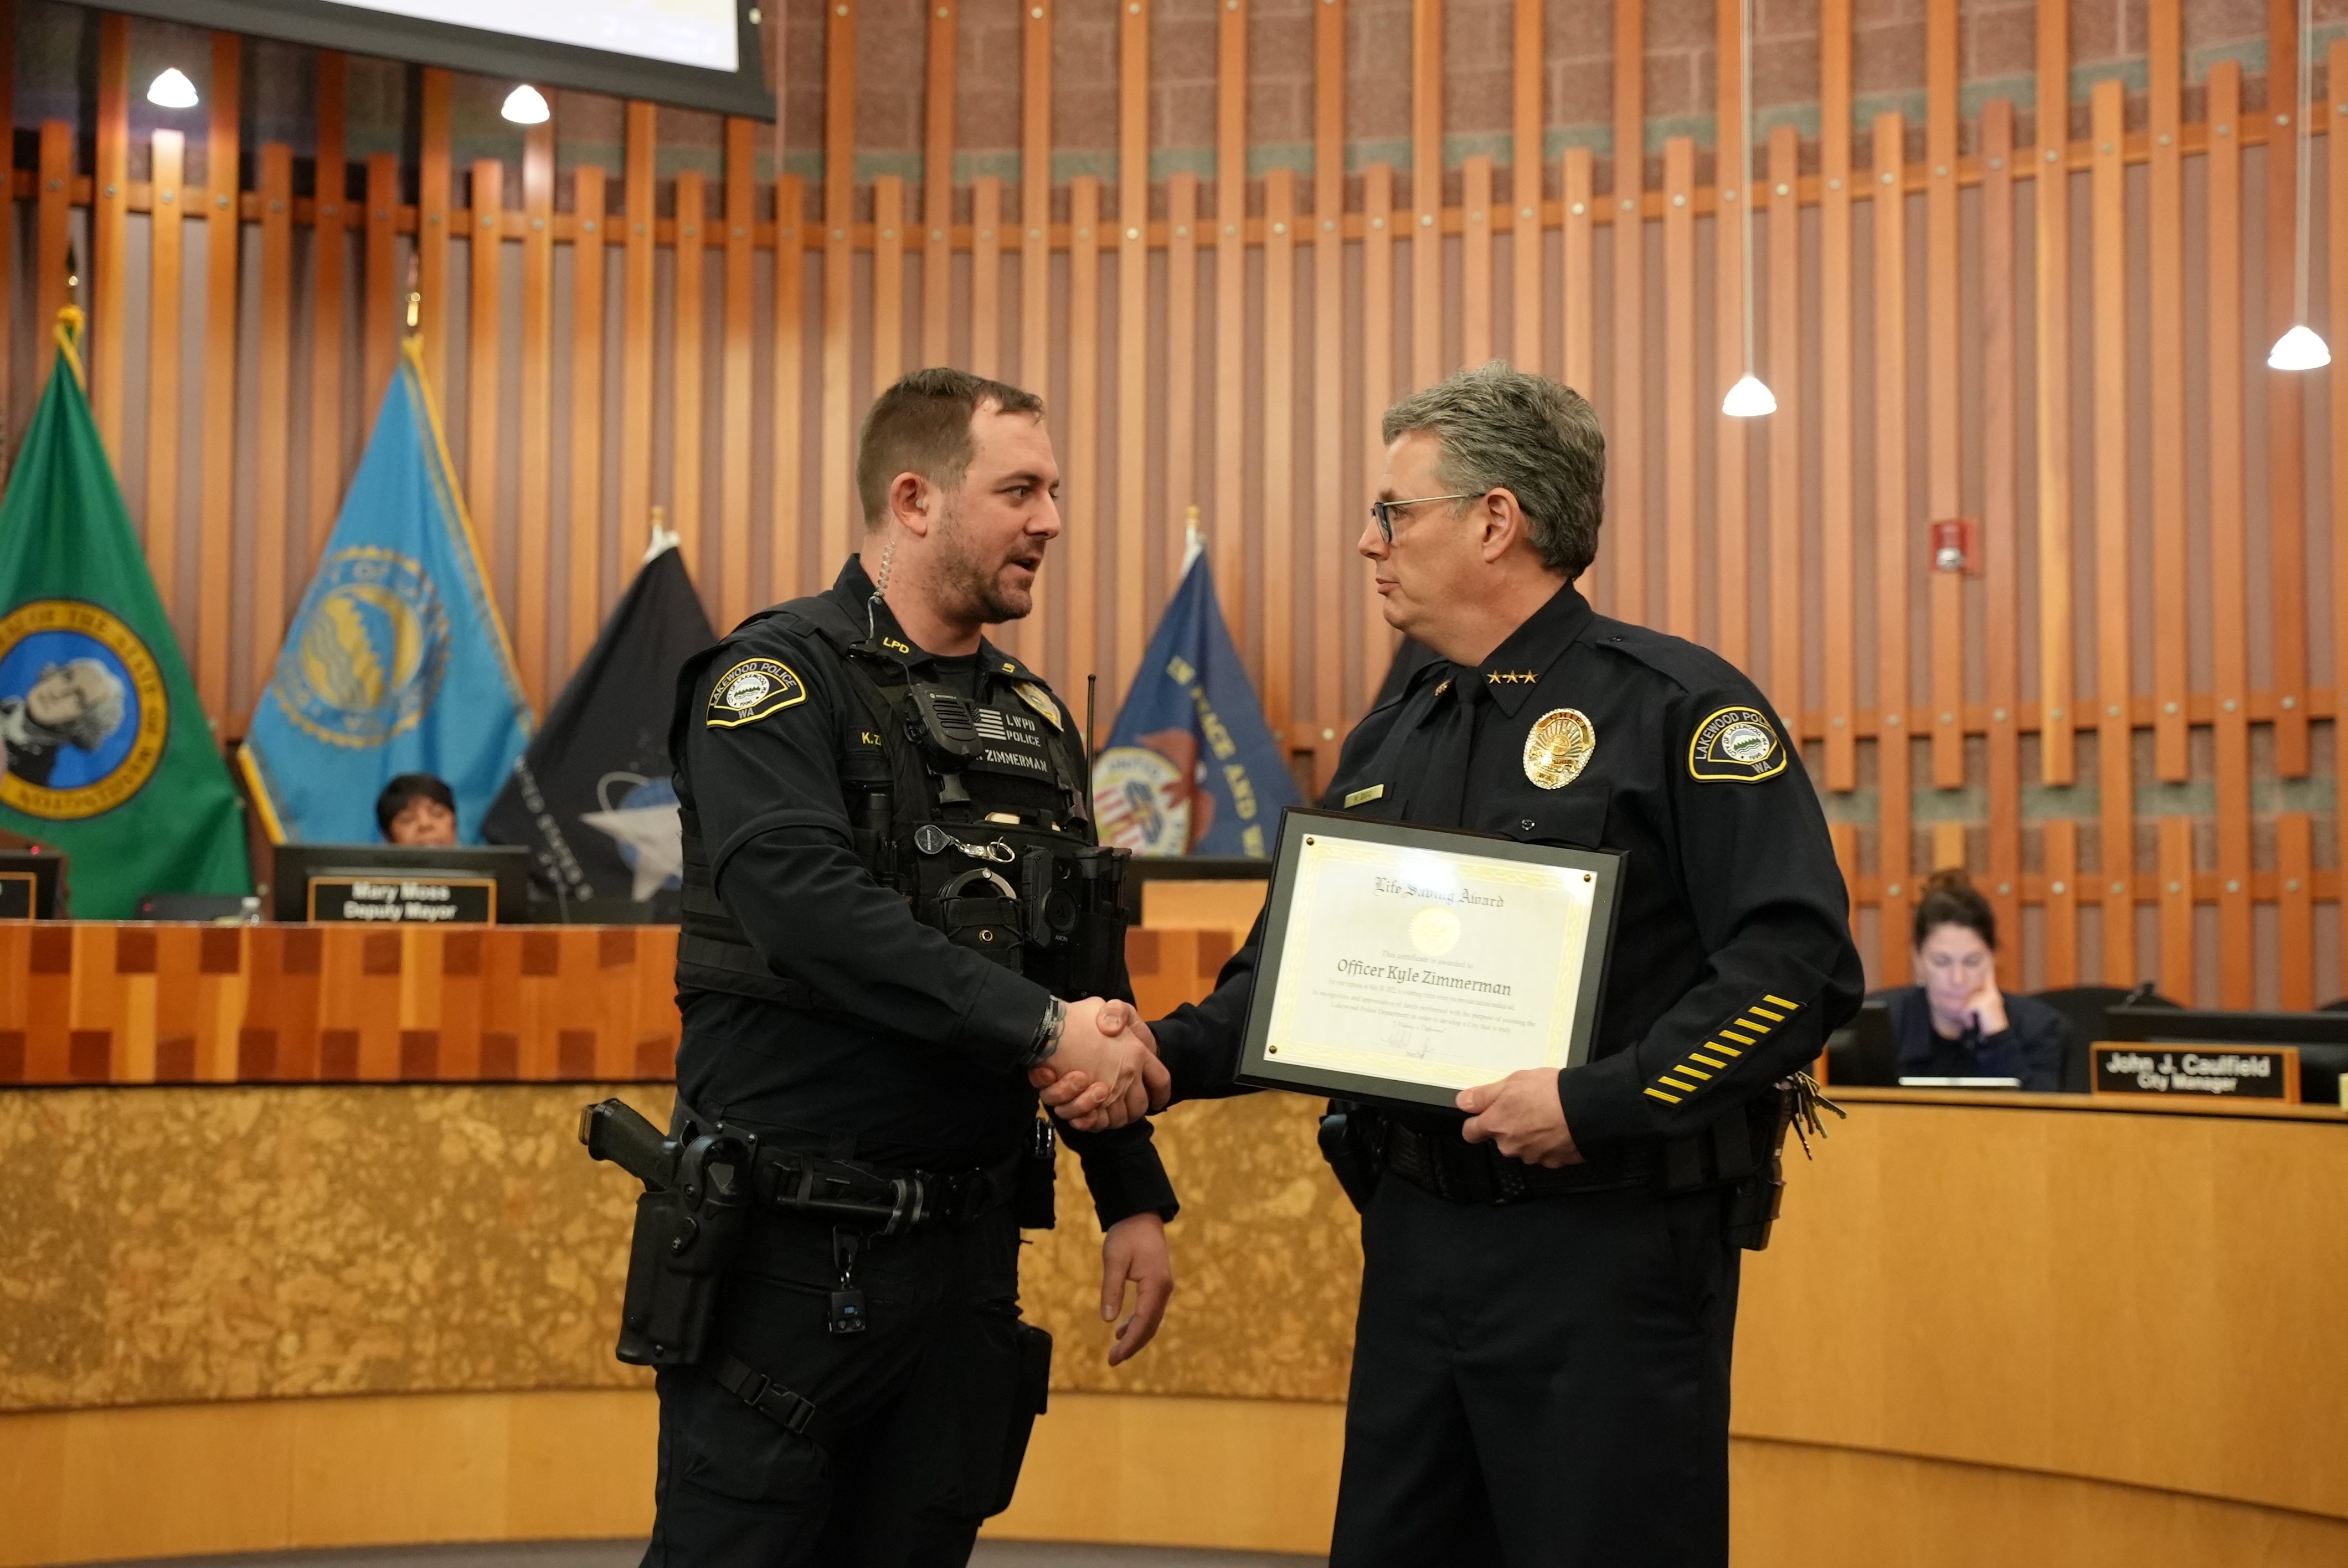 Officer Kyle Zimmerman receives a life-saving award from Chief Zaro.